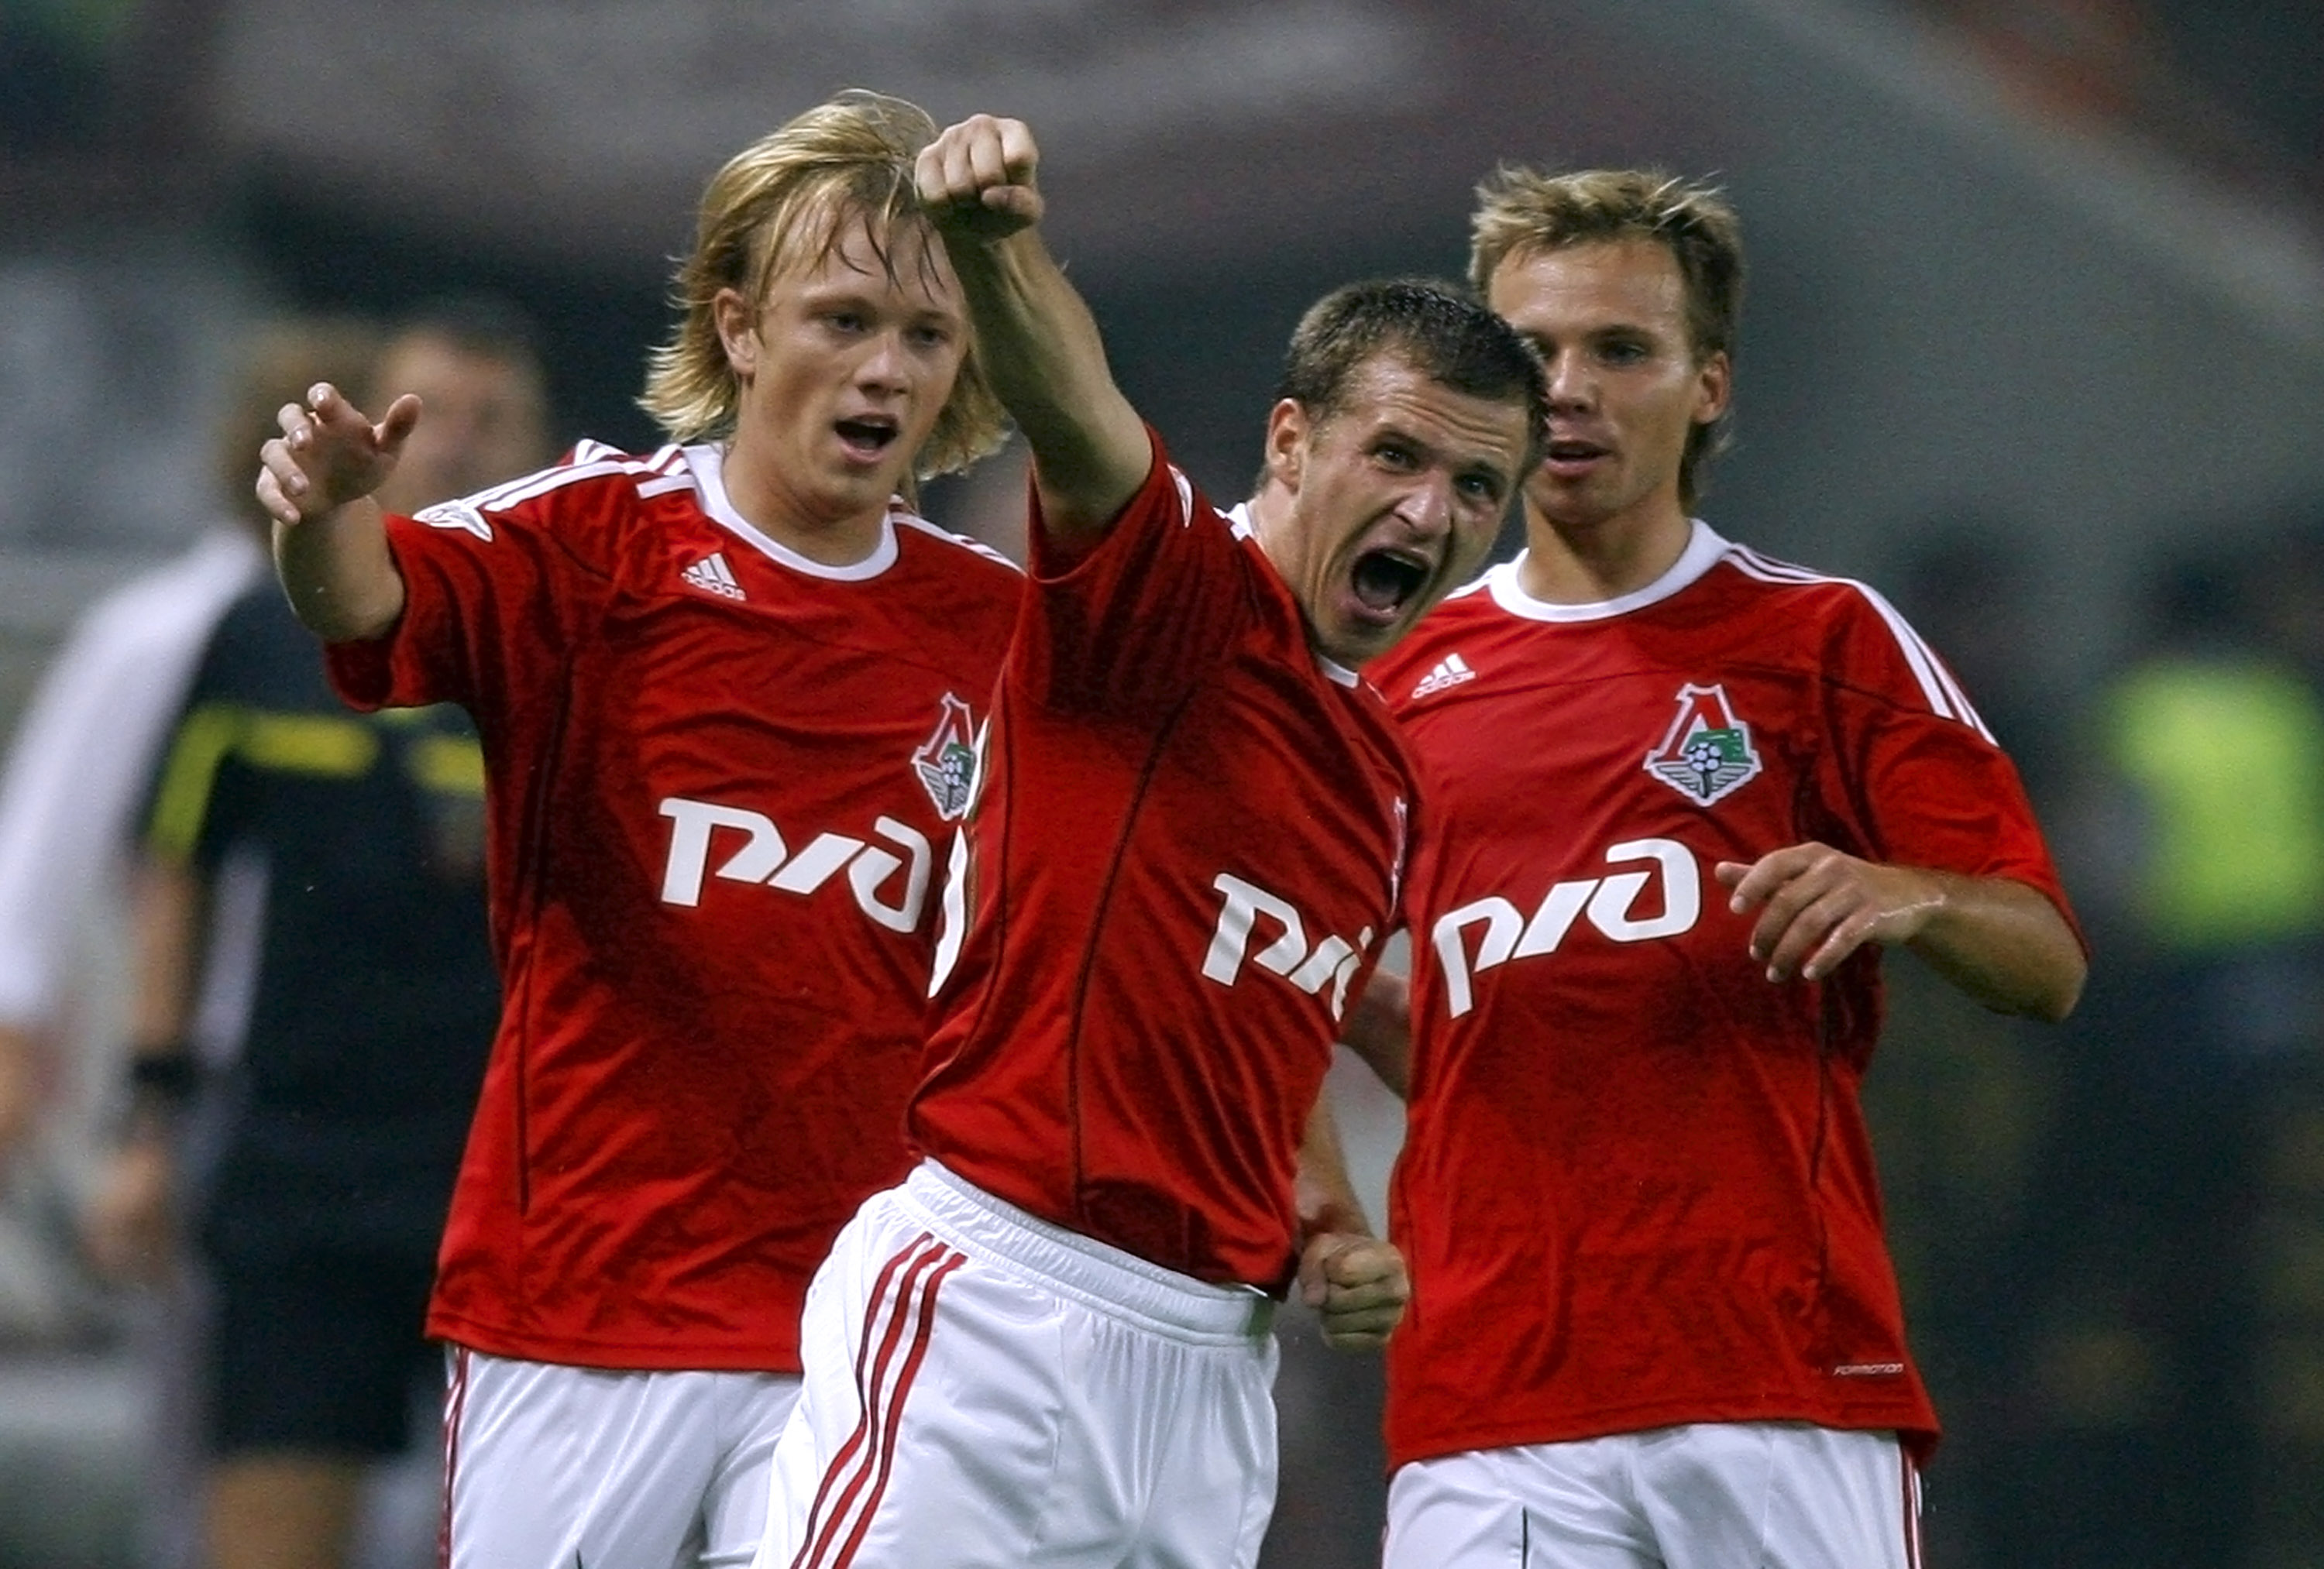 Spartak Moscow win first league title since 2001